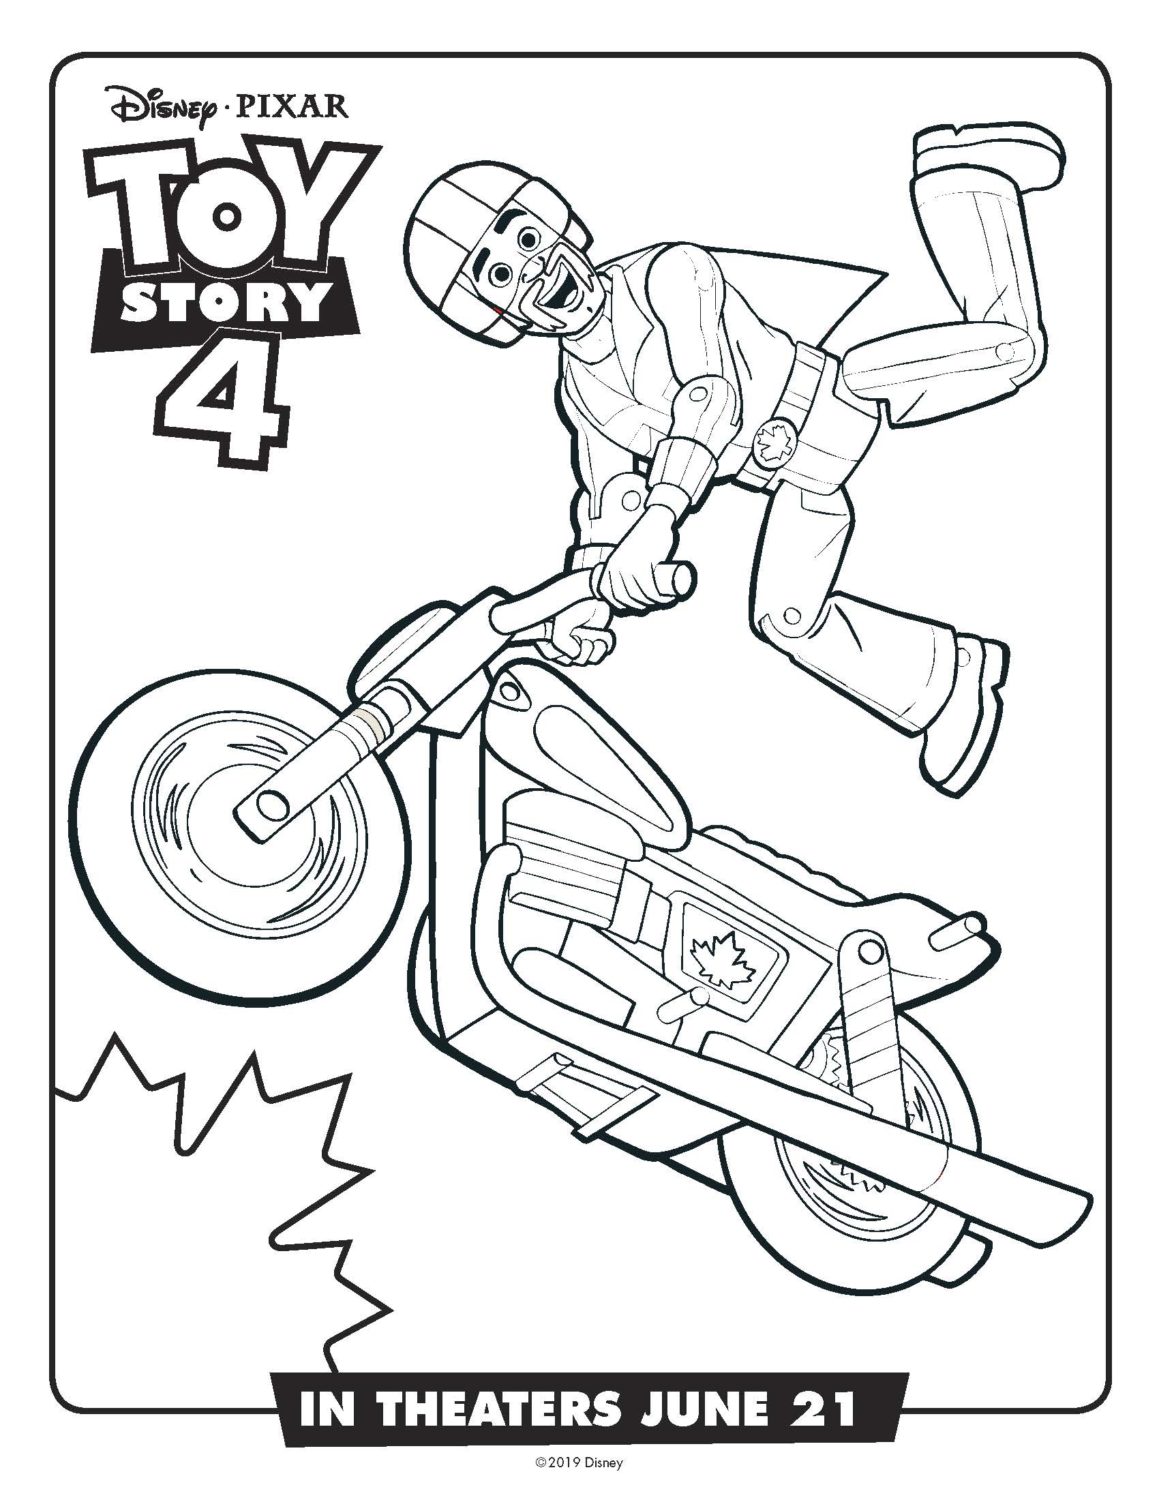 Toy Story 4 Duke Caboom Coloring Page and Activity Sheet